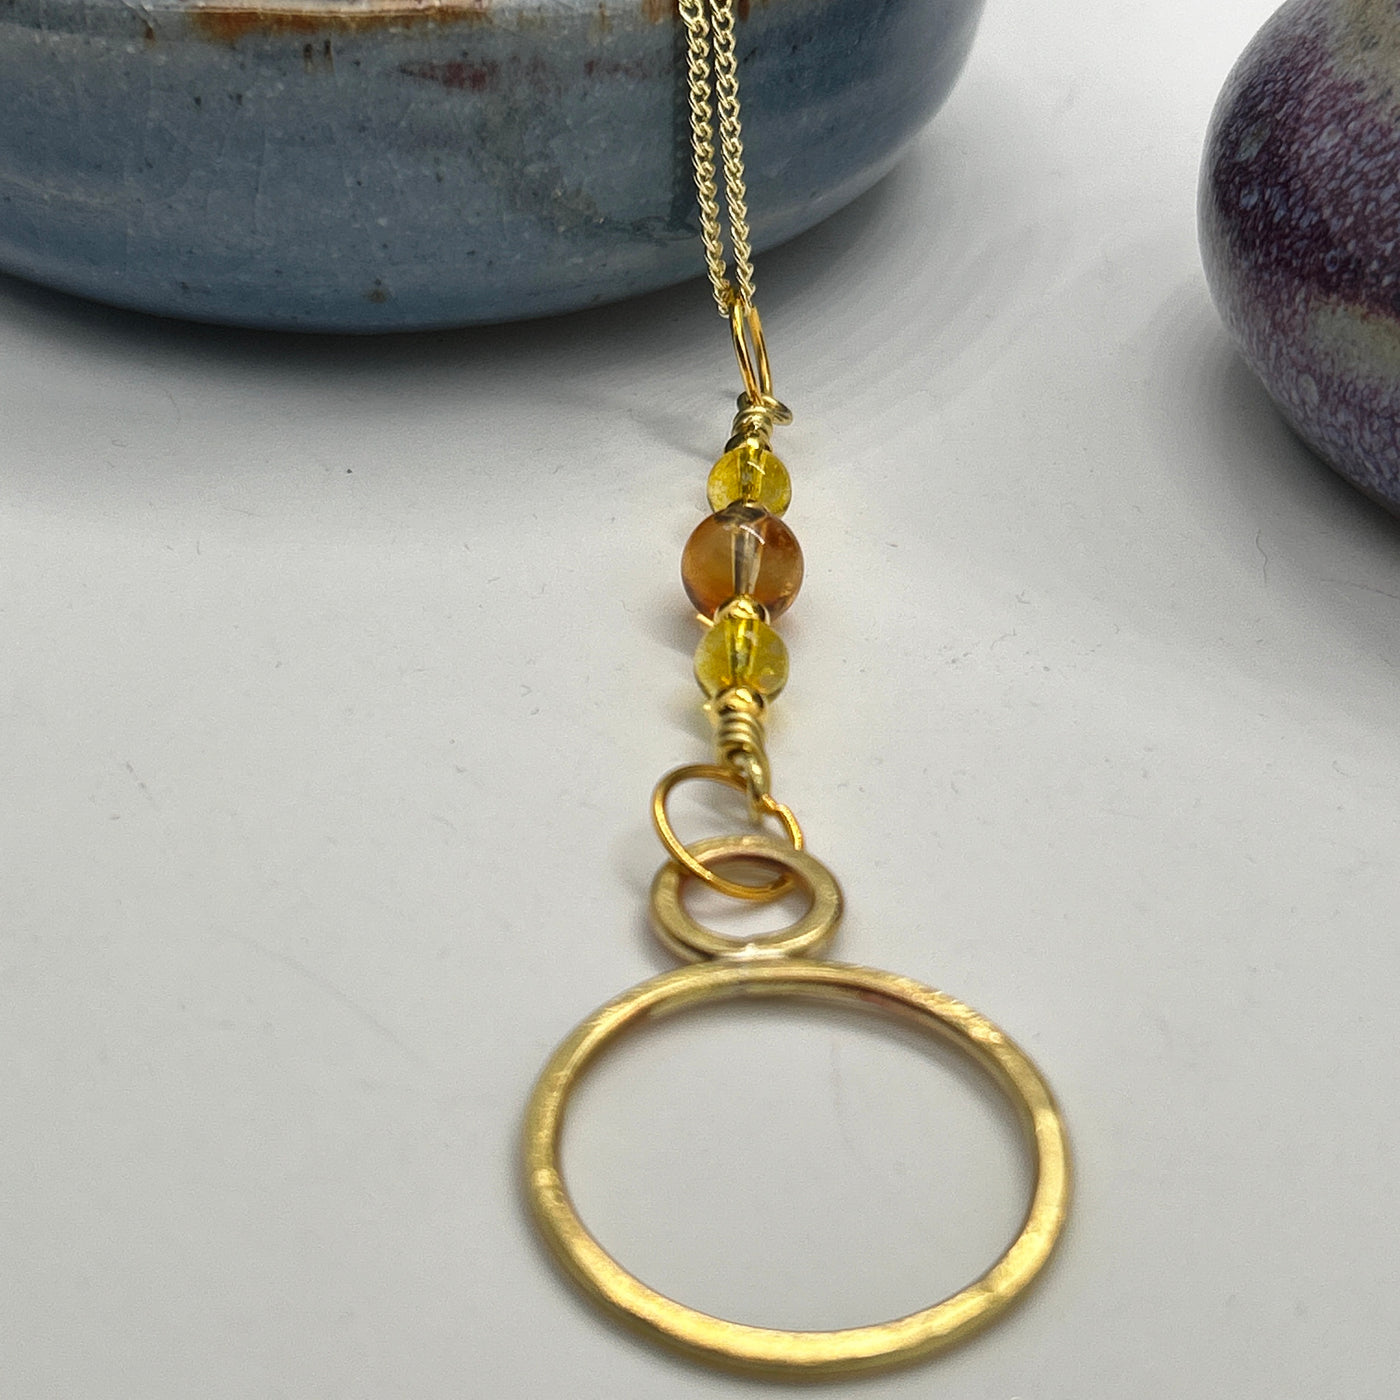 Brass and citrine round pendant. Pendant is 10 cm long and the total necklace lenght is 60 cm